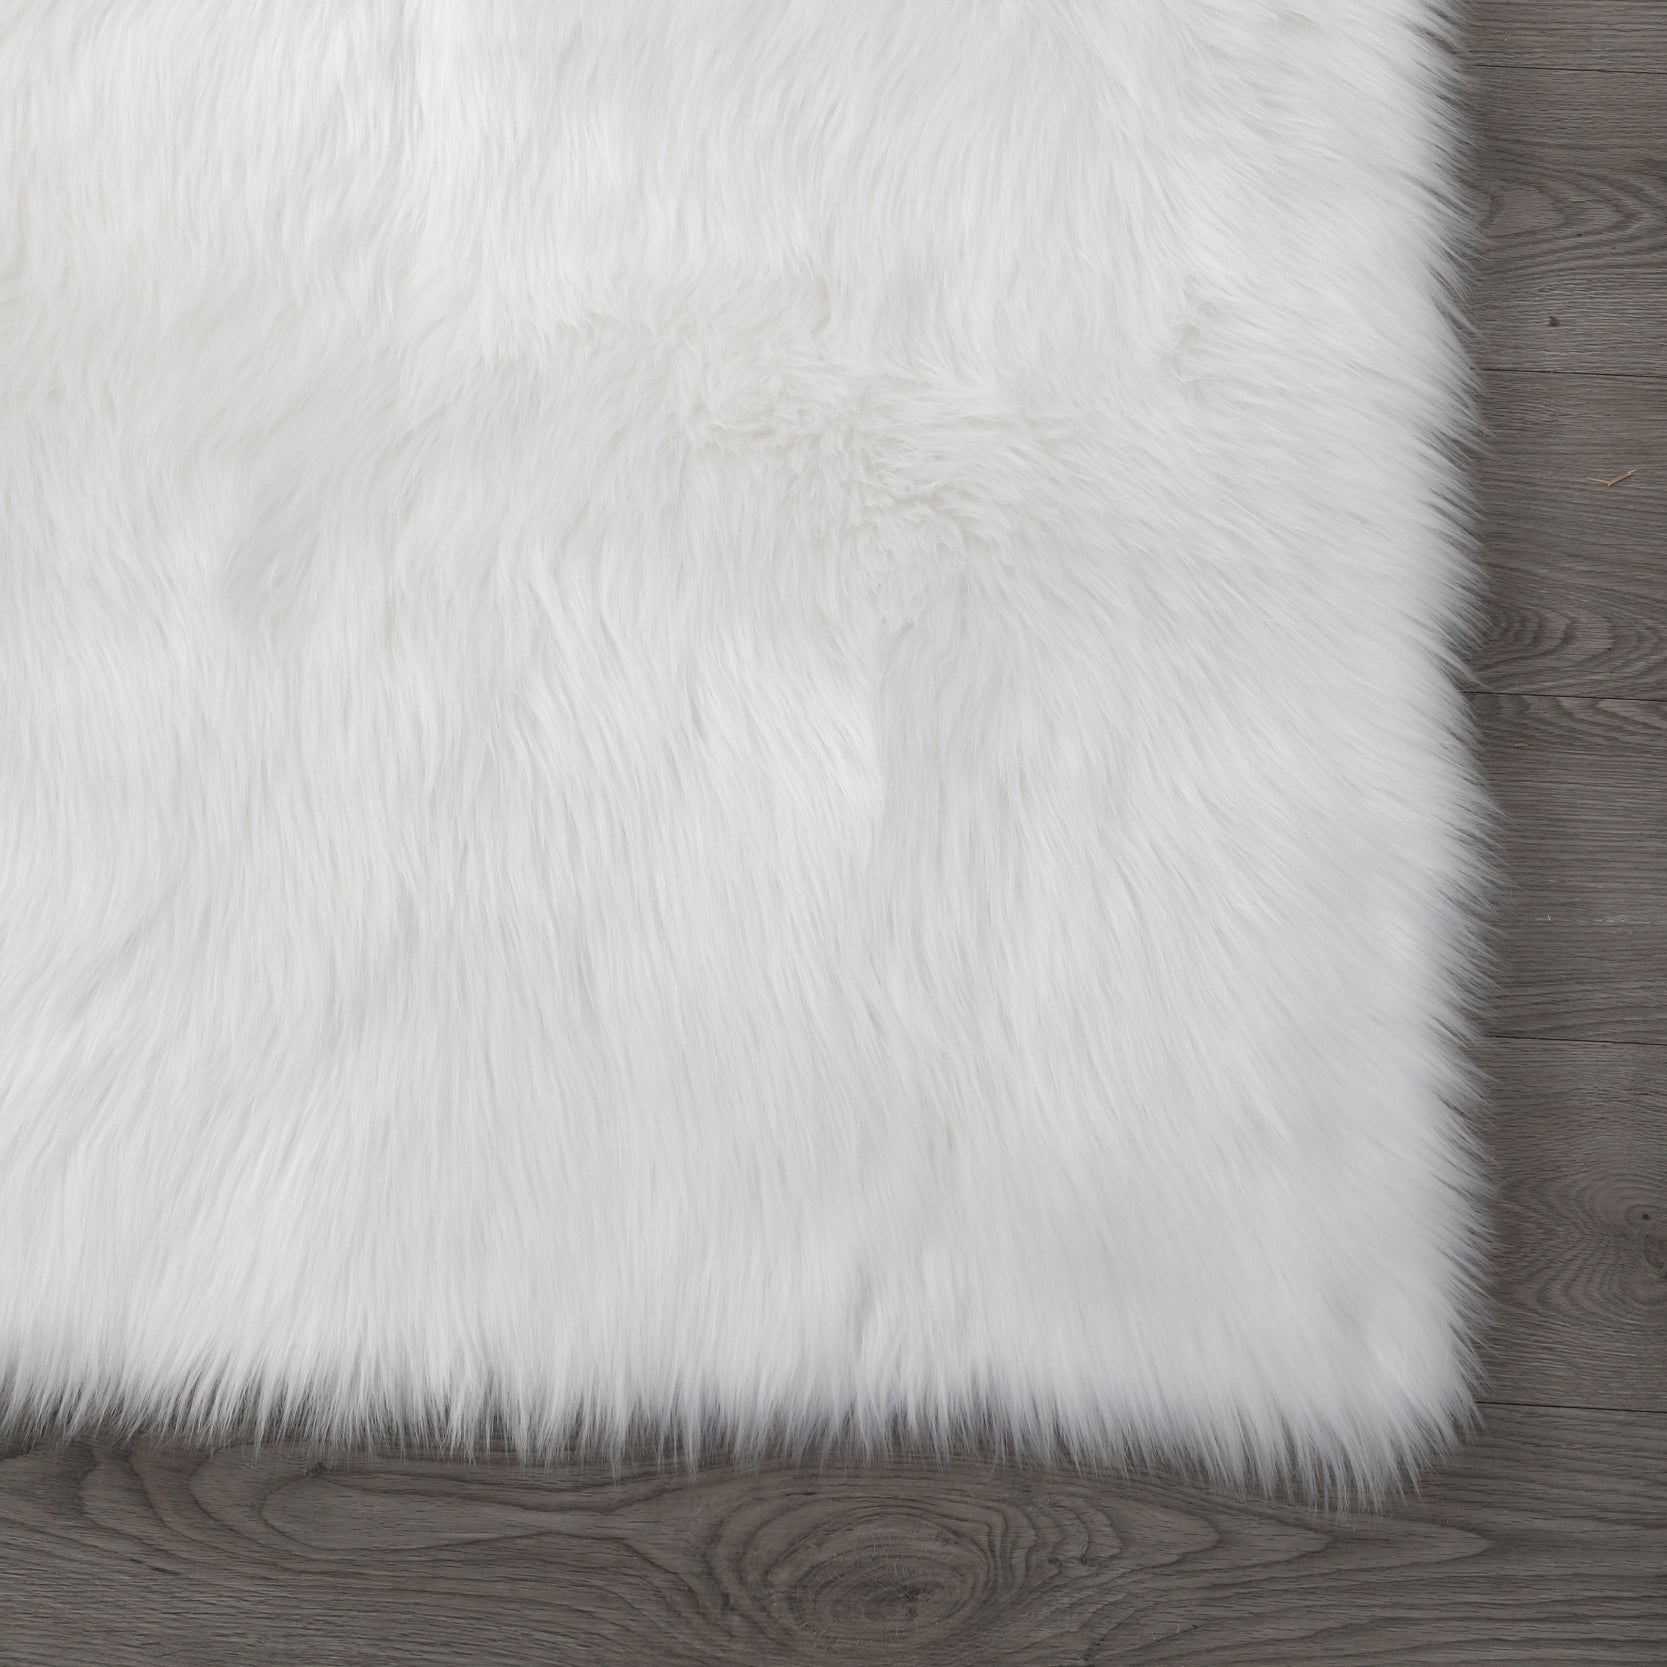 "Cozy Collection" Ultra Soft Fluffy Faux Fur Sheepskin Area Rug